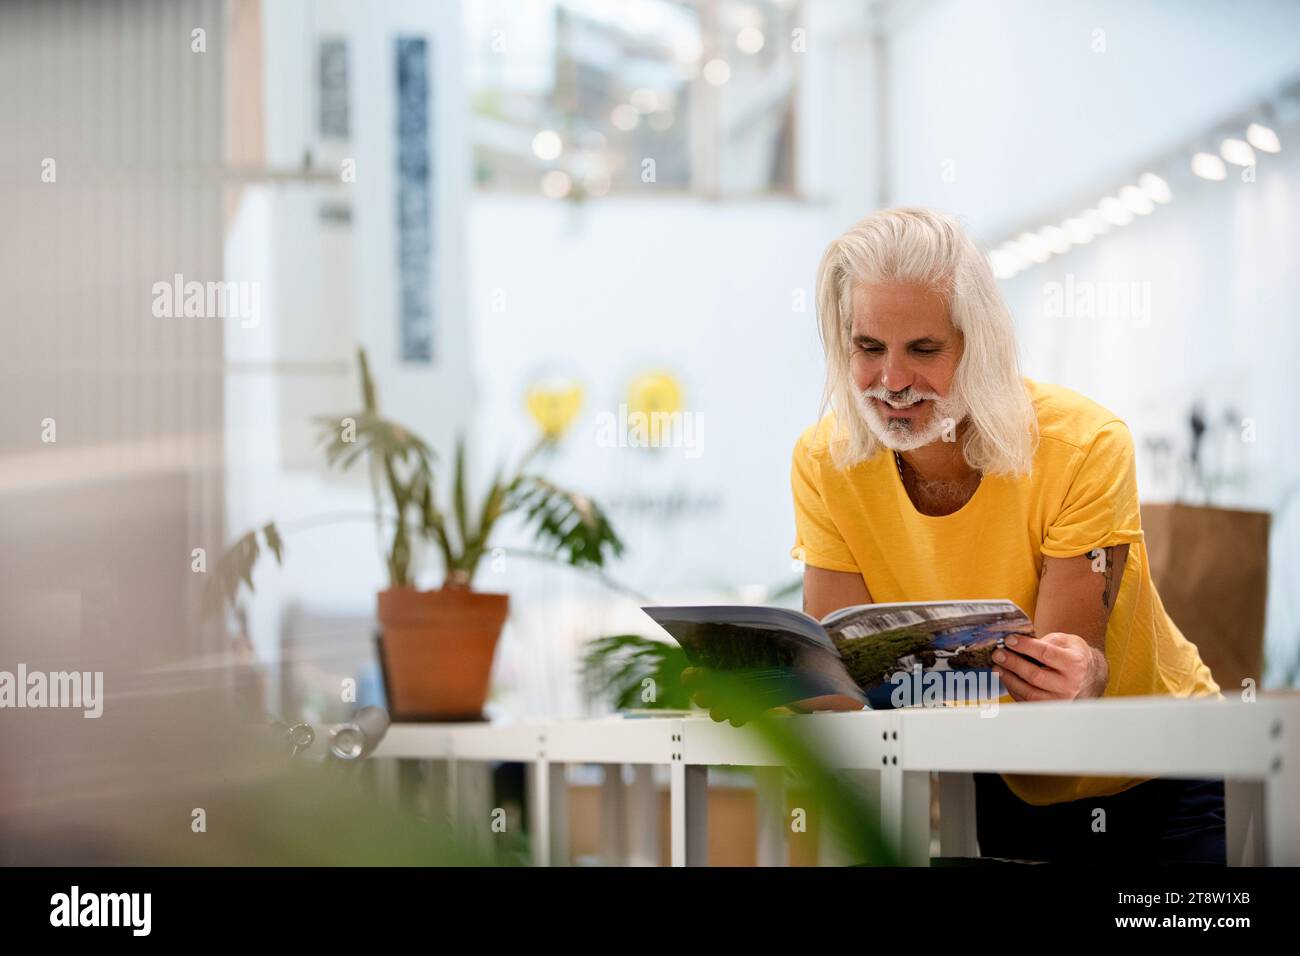 Adult male designer leaning on table while reading magazine Stock Photo